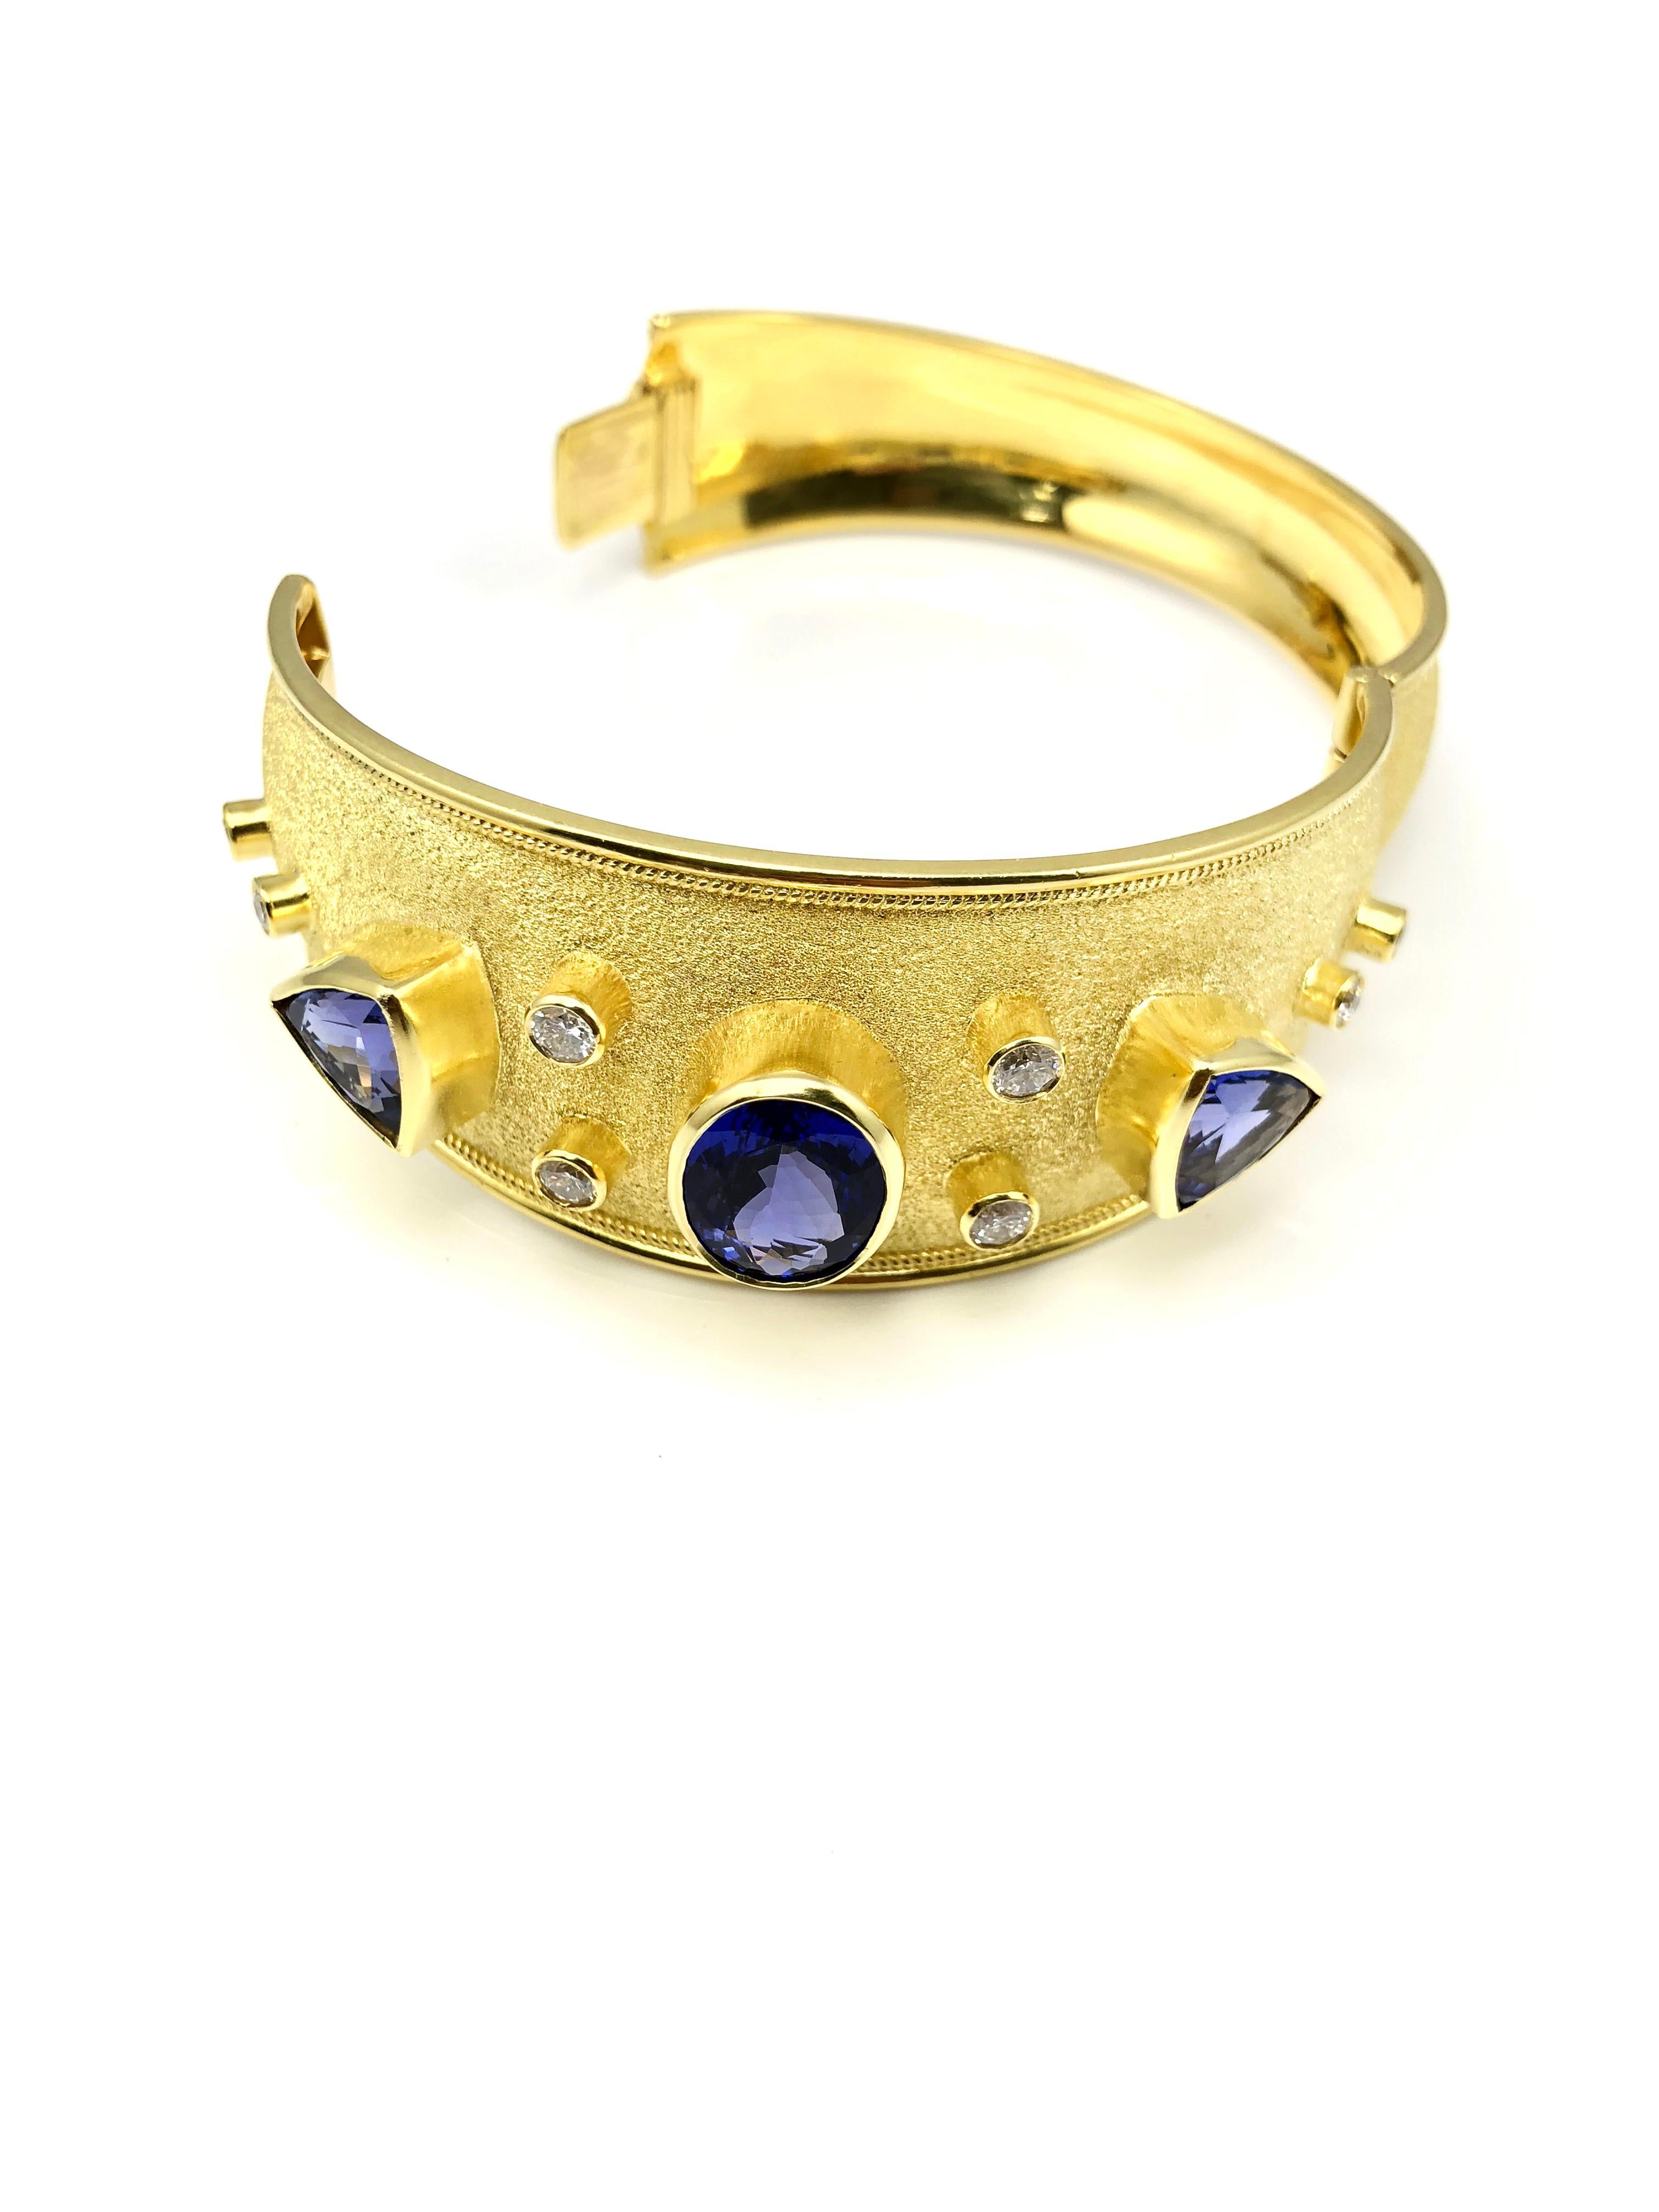 S.Georgios designer Bangle Bracelet is handmade from solid 18 Karat Yellow Gold all custom-made. This beautiful bracelet in its simplicity features Oval and Triangular Shape Tanzanites and 8 Diamonds on a unique Byzantine velvet background. The